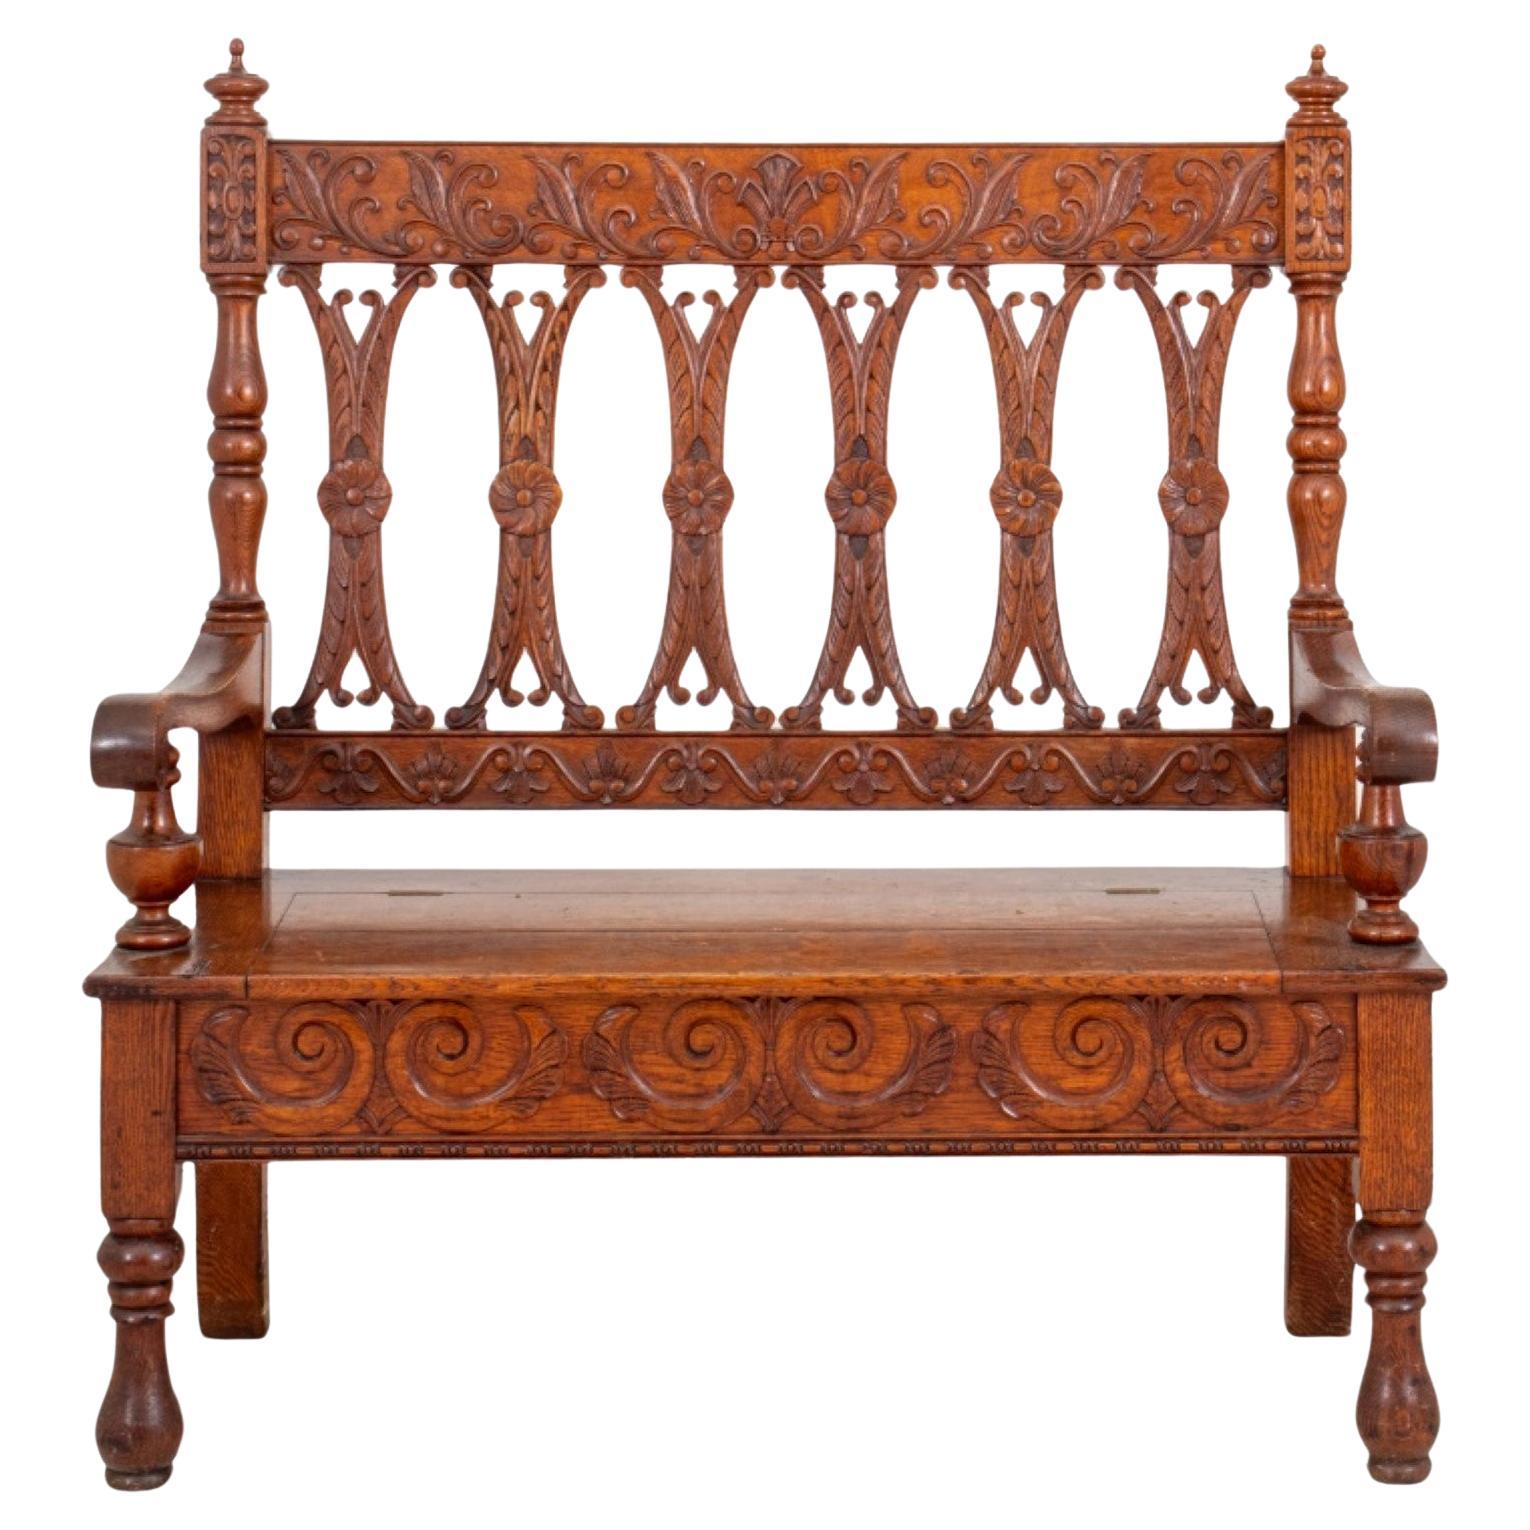 Renaissance Style Hall Bench or Settee